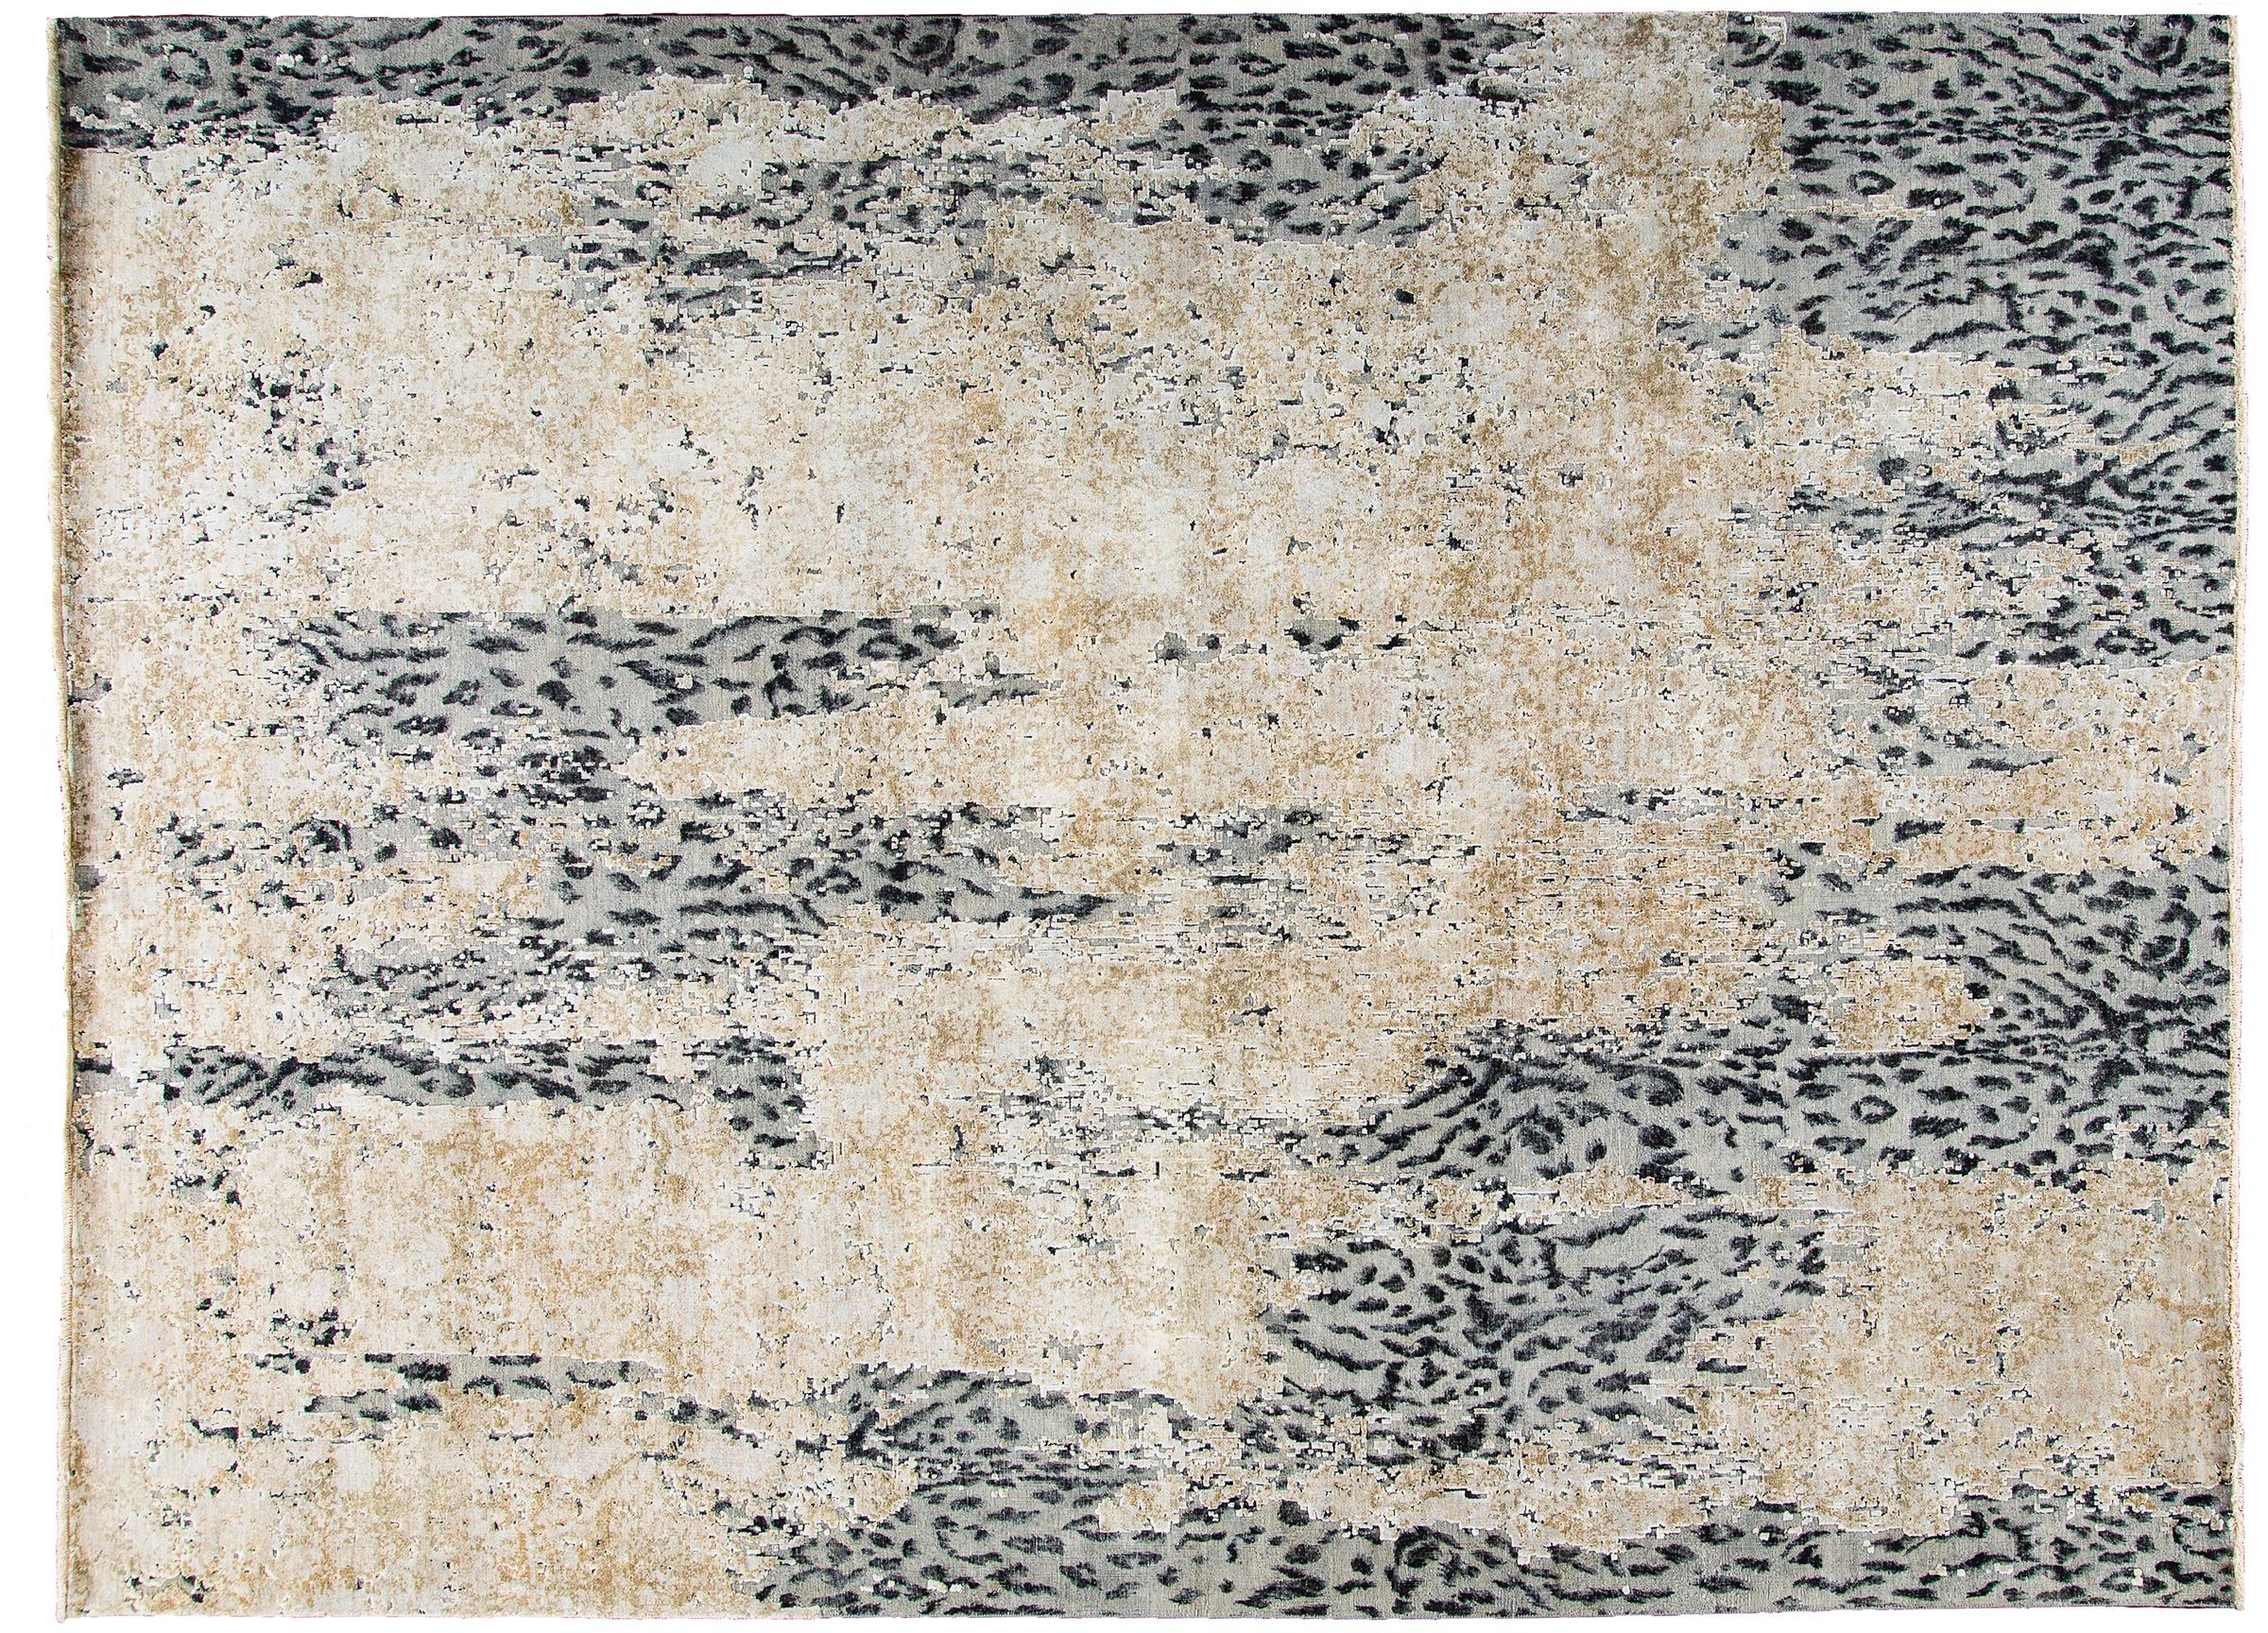 This contemporary leopard wool and silk Indian rug in gray, creme and black transforms this ubiquitous animal motif into couture for your floor. The hand-knotted, leopard patterned wool ground in gray and black, undulates in and out of an overlay of